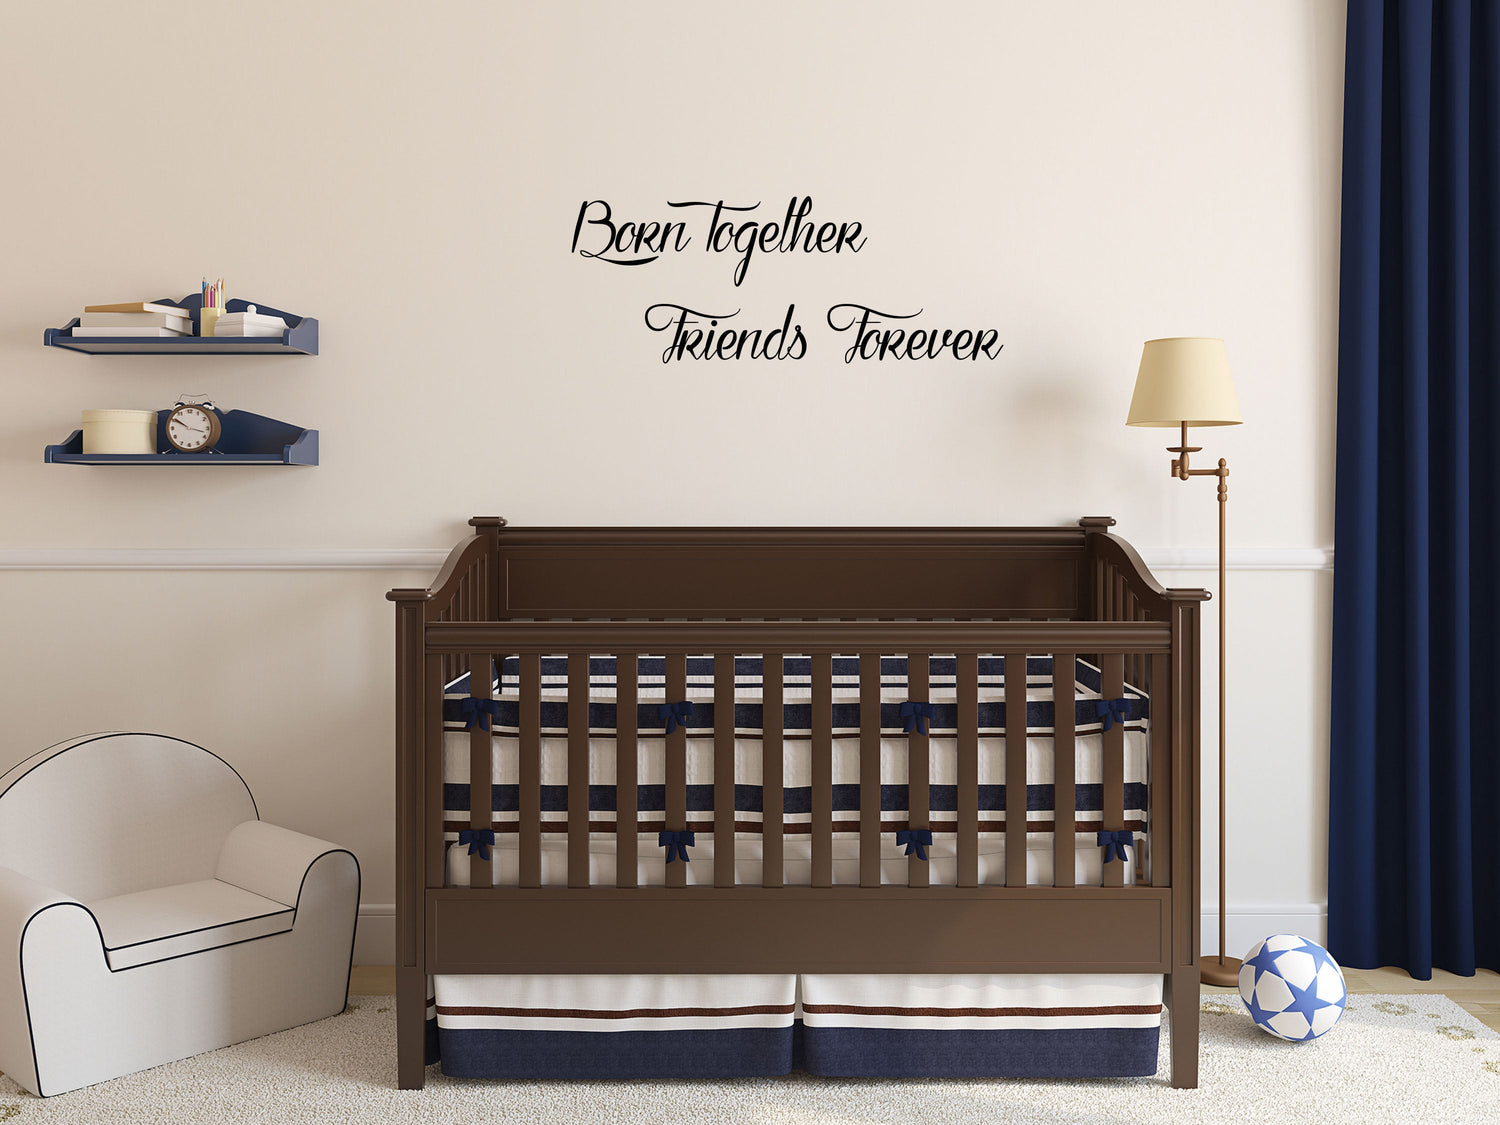 Born Together Friends Forever Twins Wall Decal Quote - Inspirational Wall Signs Vinyl Wall Decal Inspirational Wall Signs 